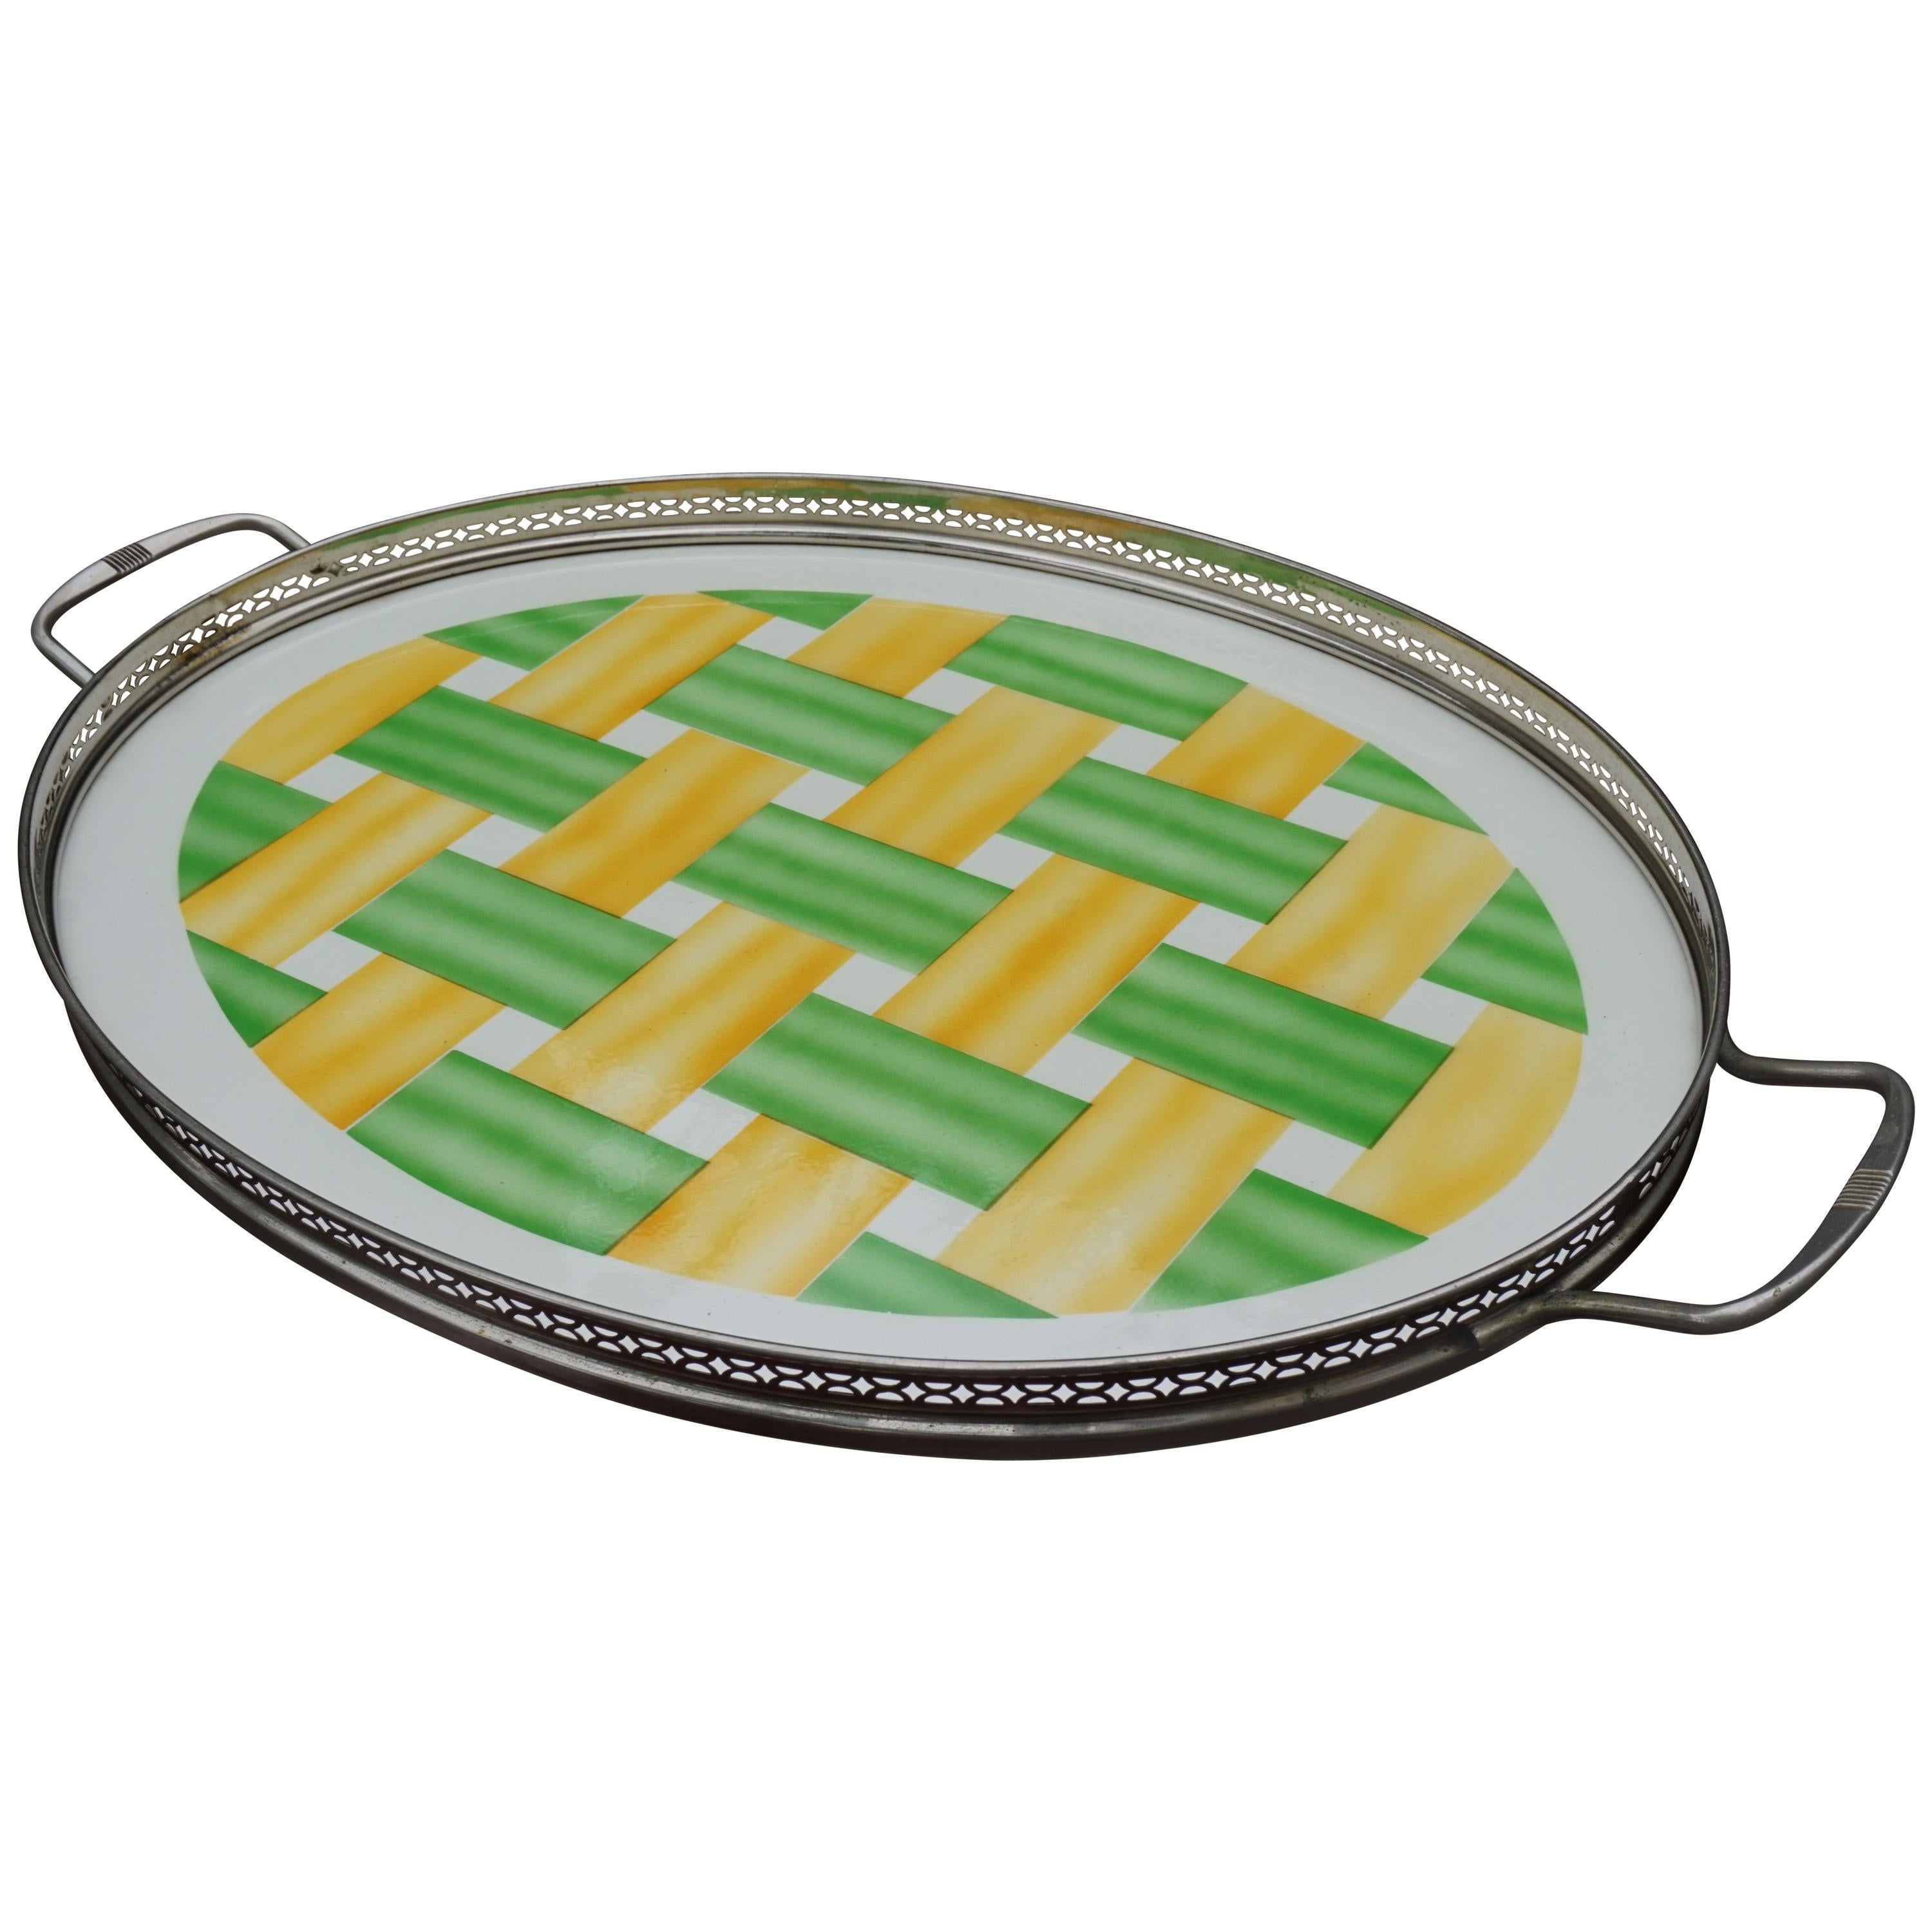 Large, Oval Art Deco Porcelain Tile Serving Tray, Woven Yellow and Green Pattern